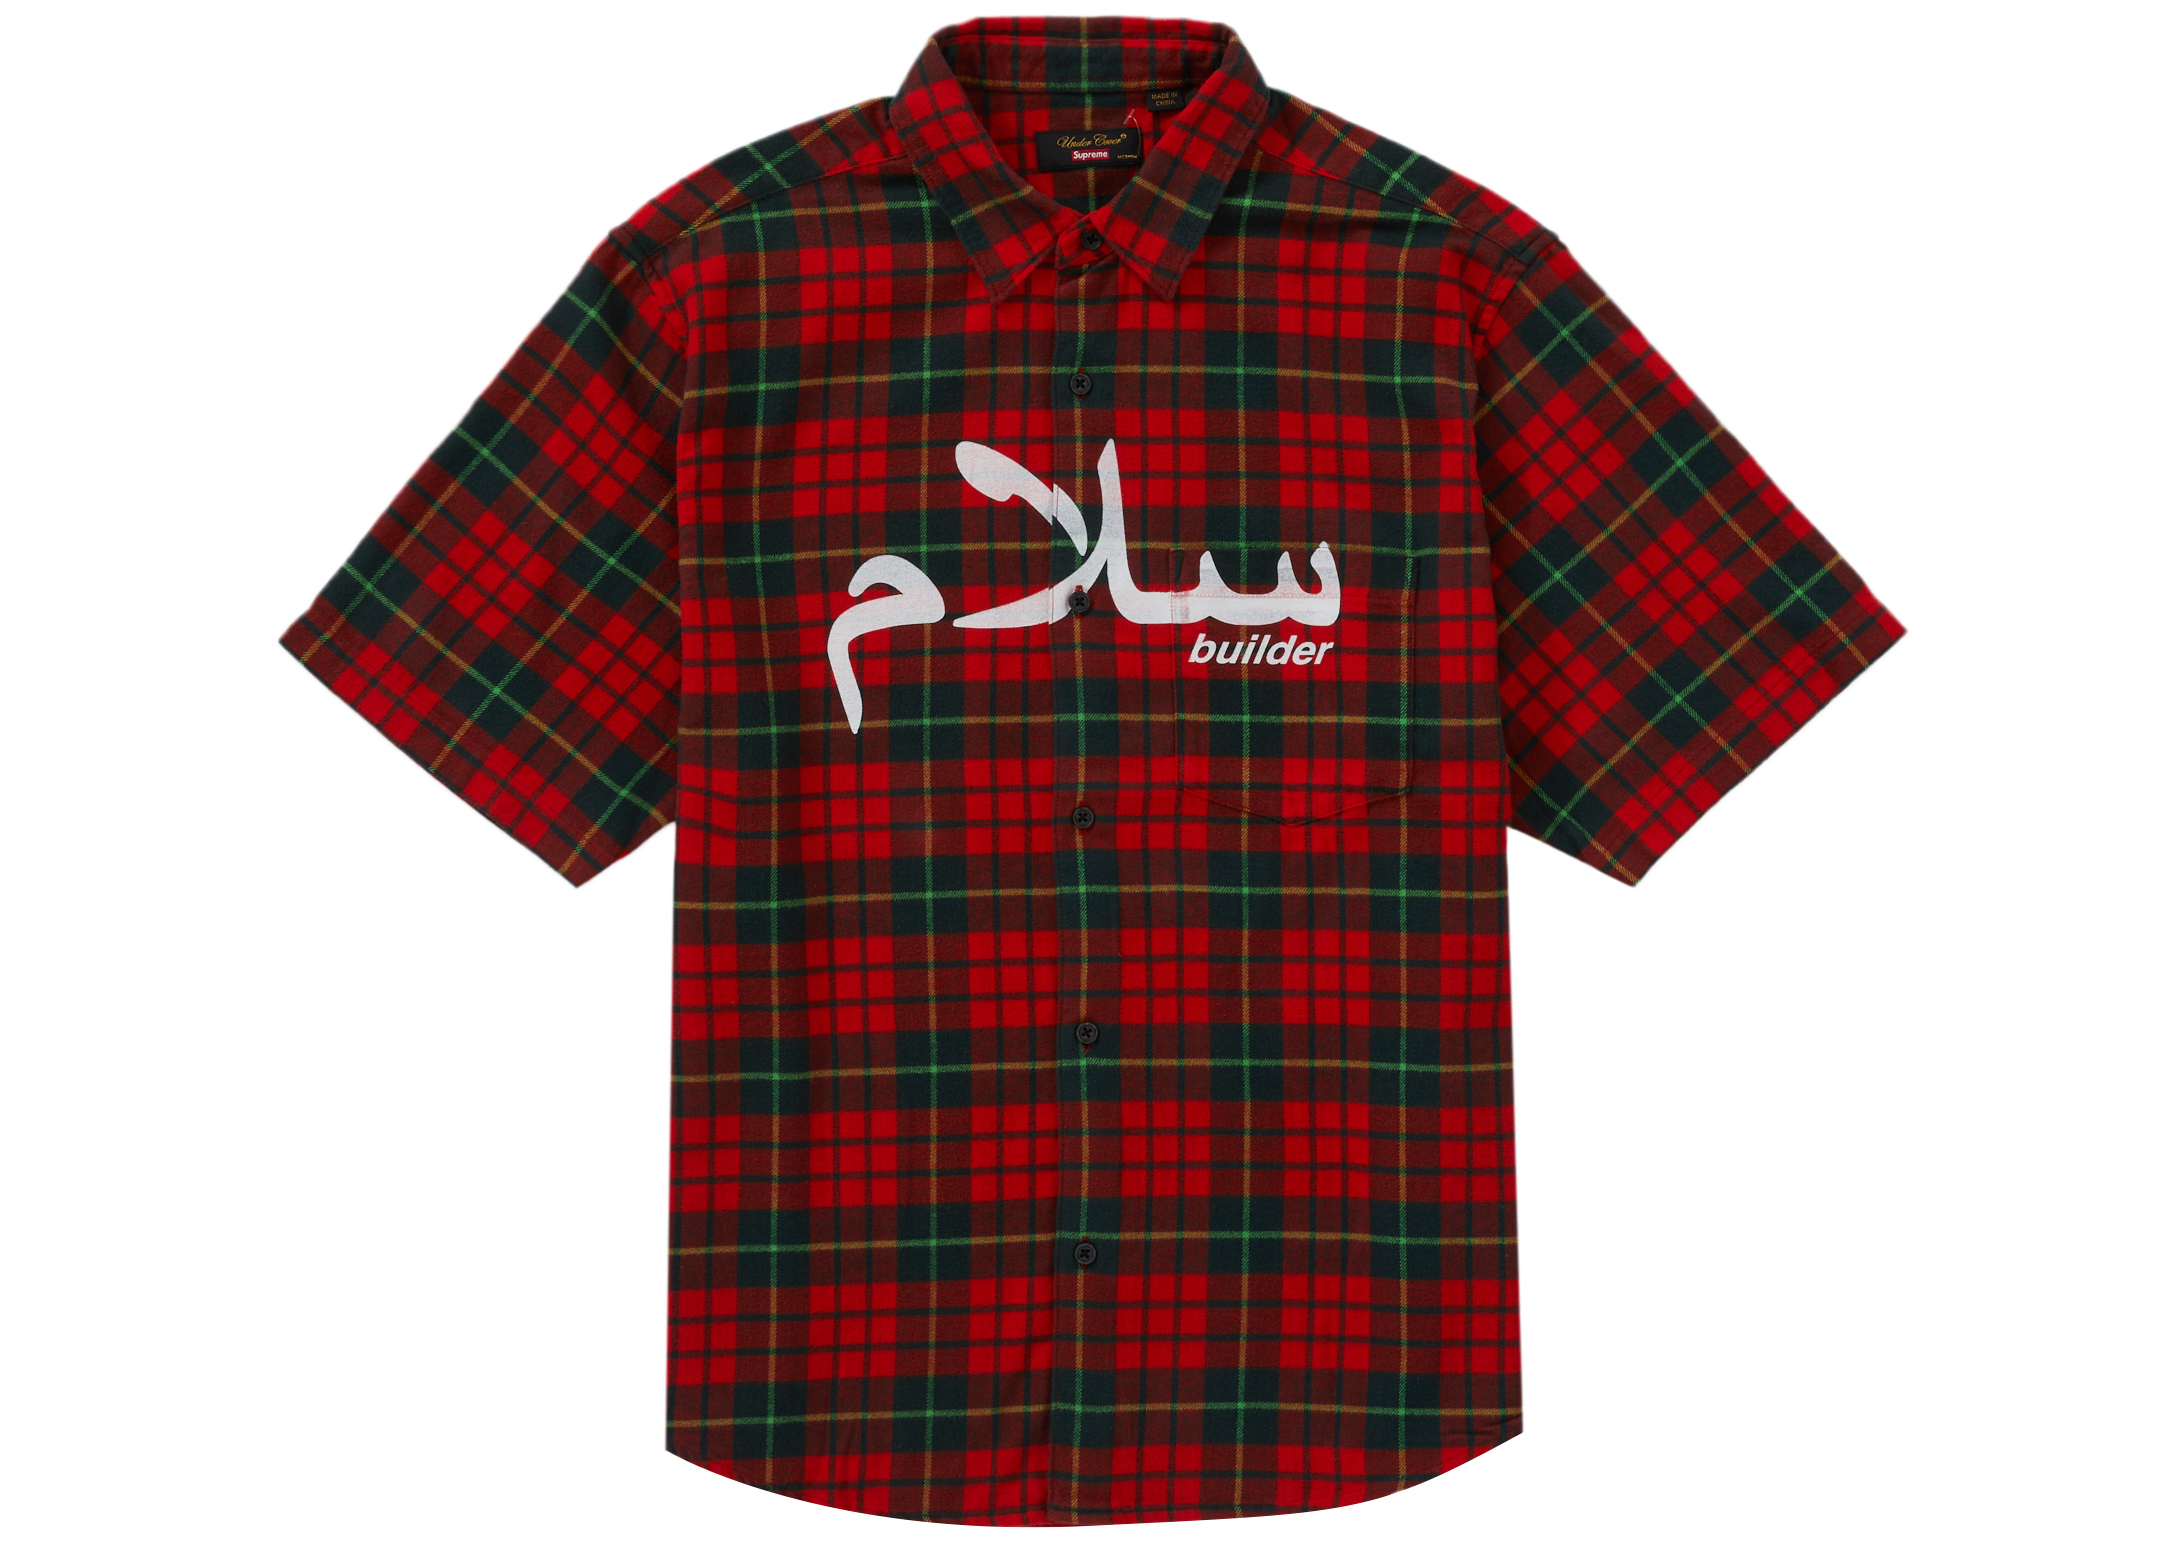 CardiganSupreme Undercover S/S Flannel Shirt